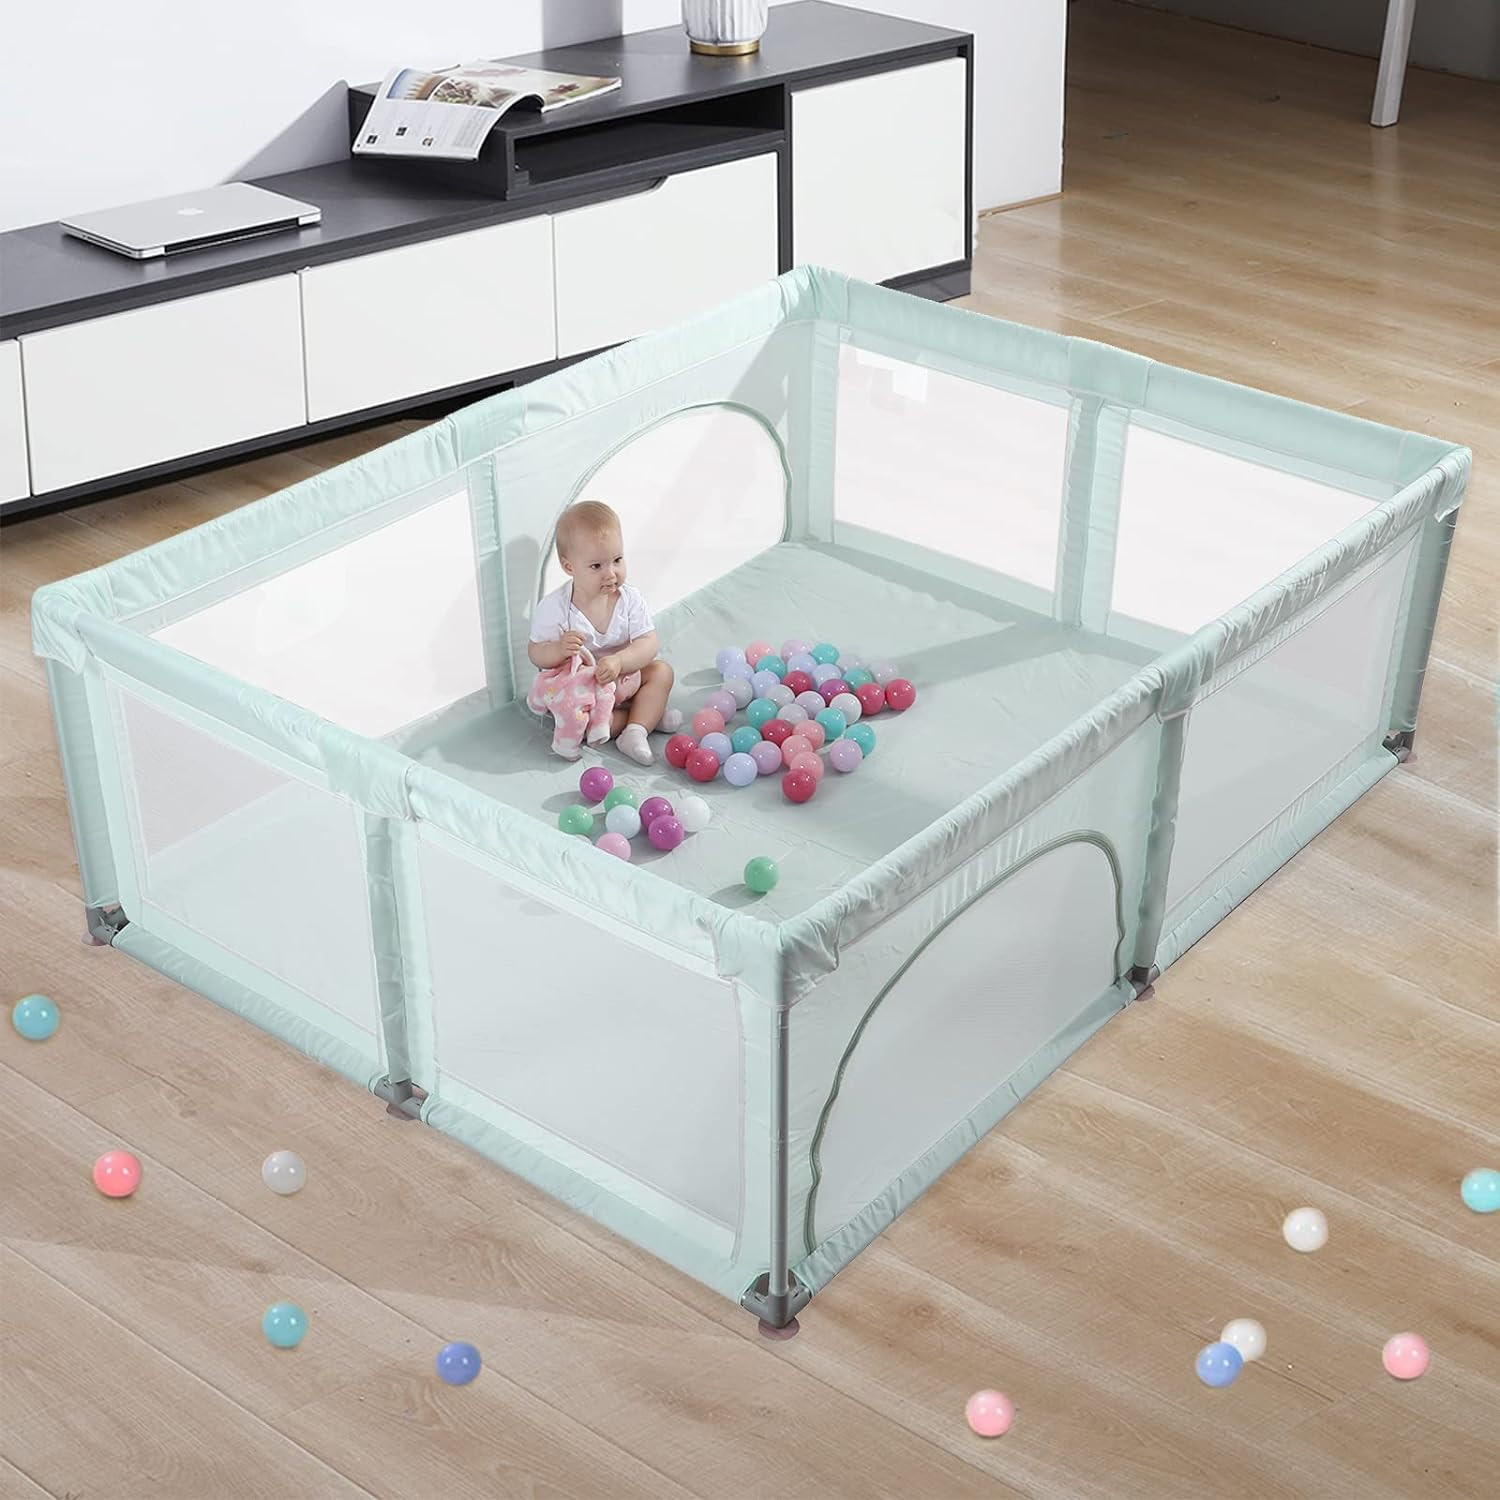 CALODY 79x59x27 Inches Baby Playpen. 200 units. EXW Los Angeles $36.00 unit.